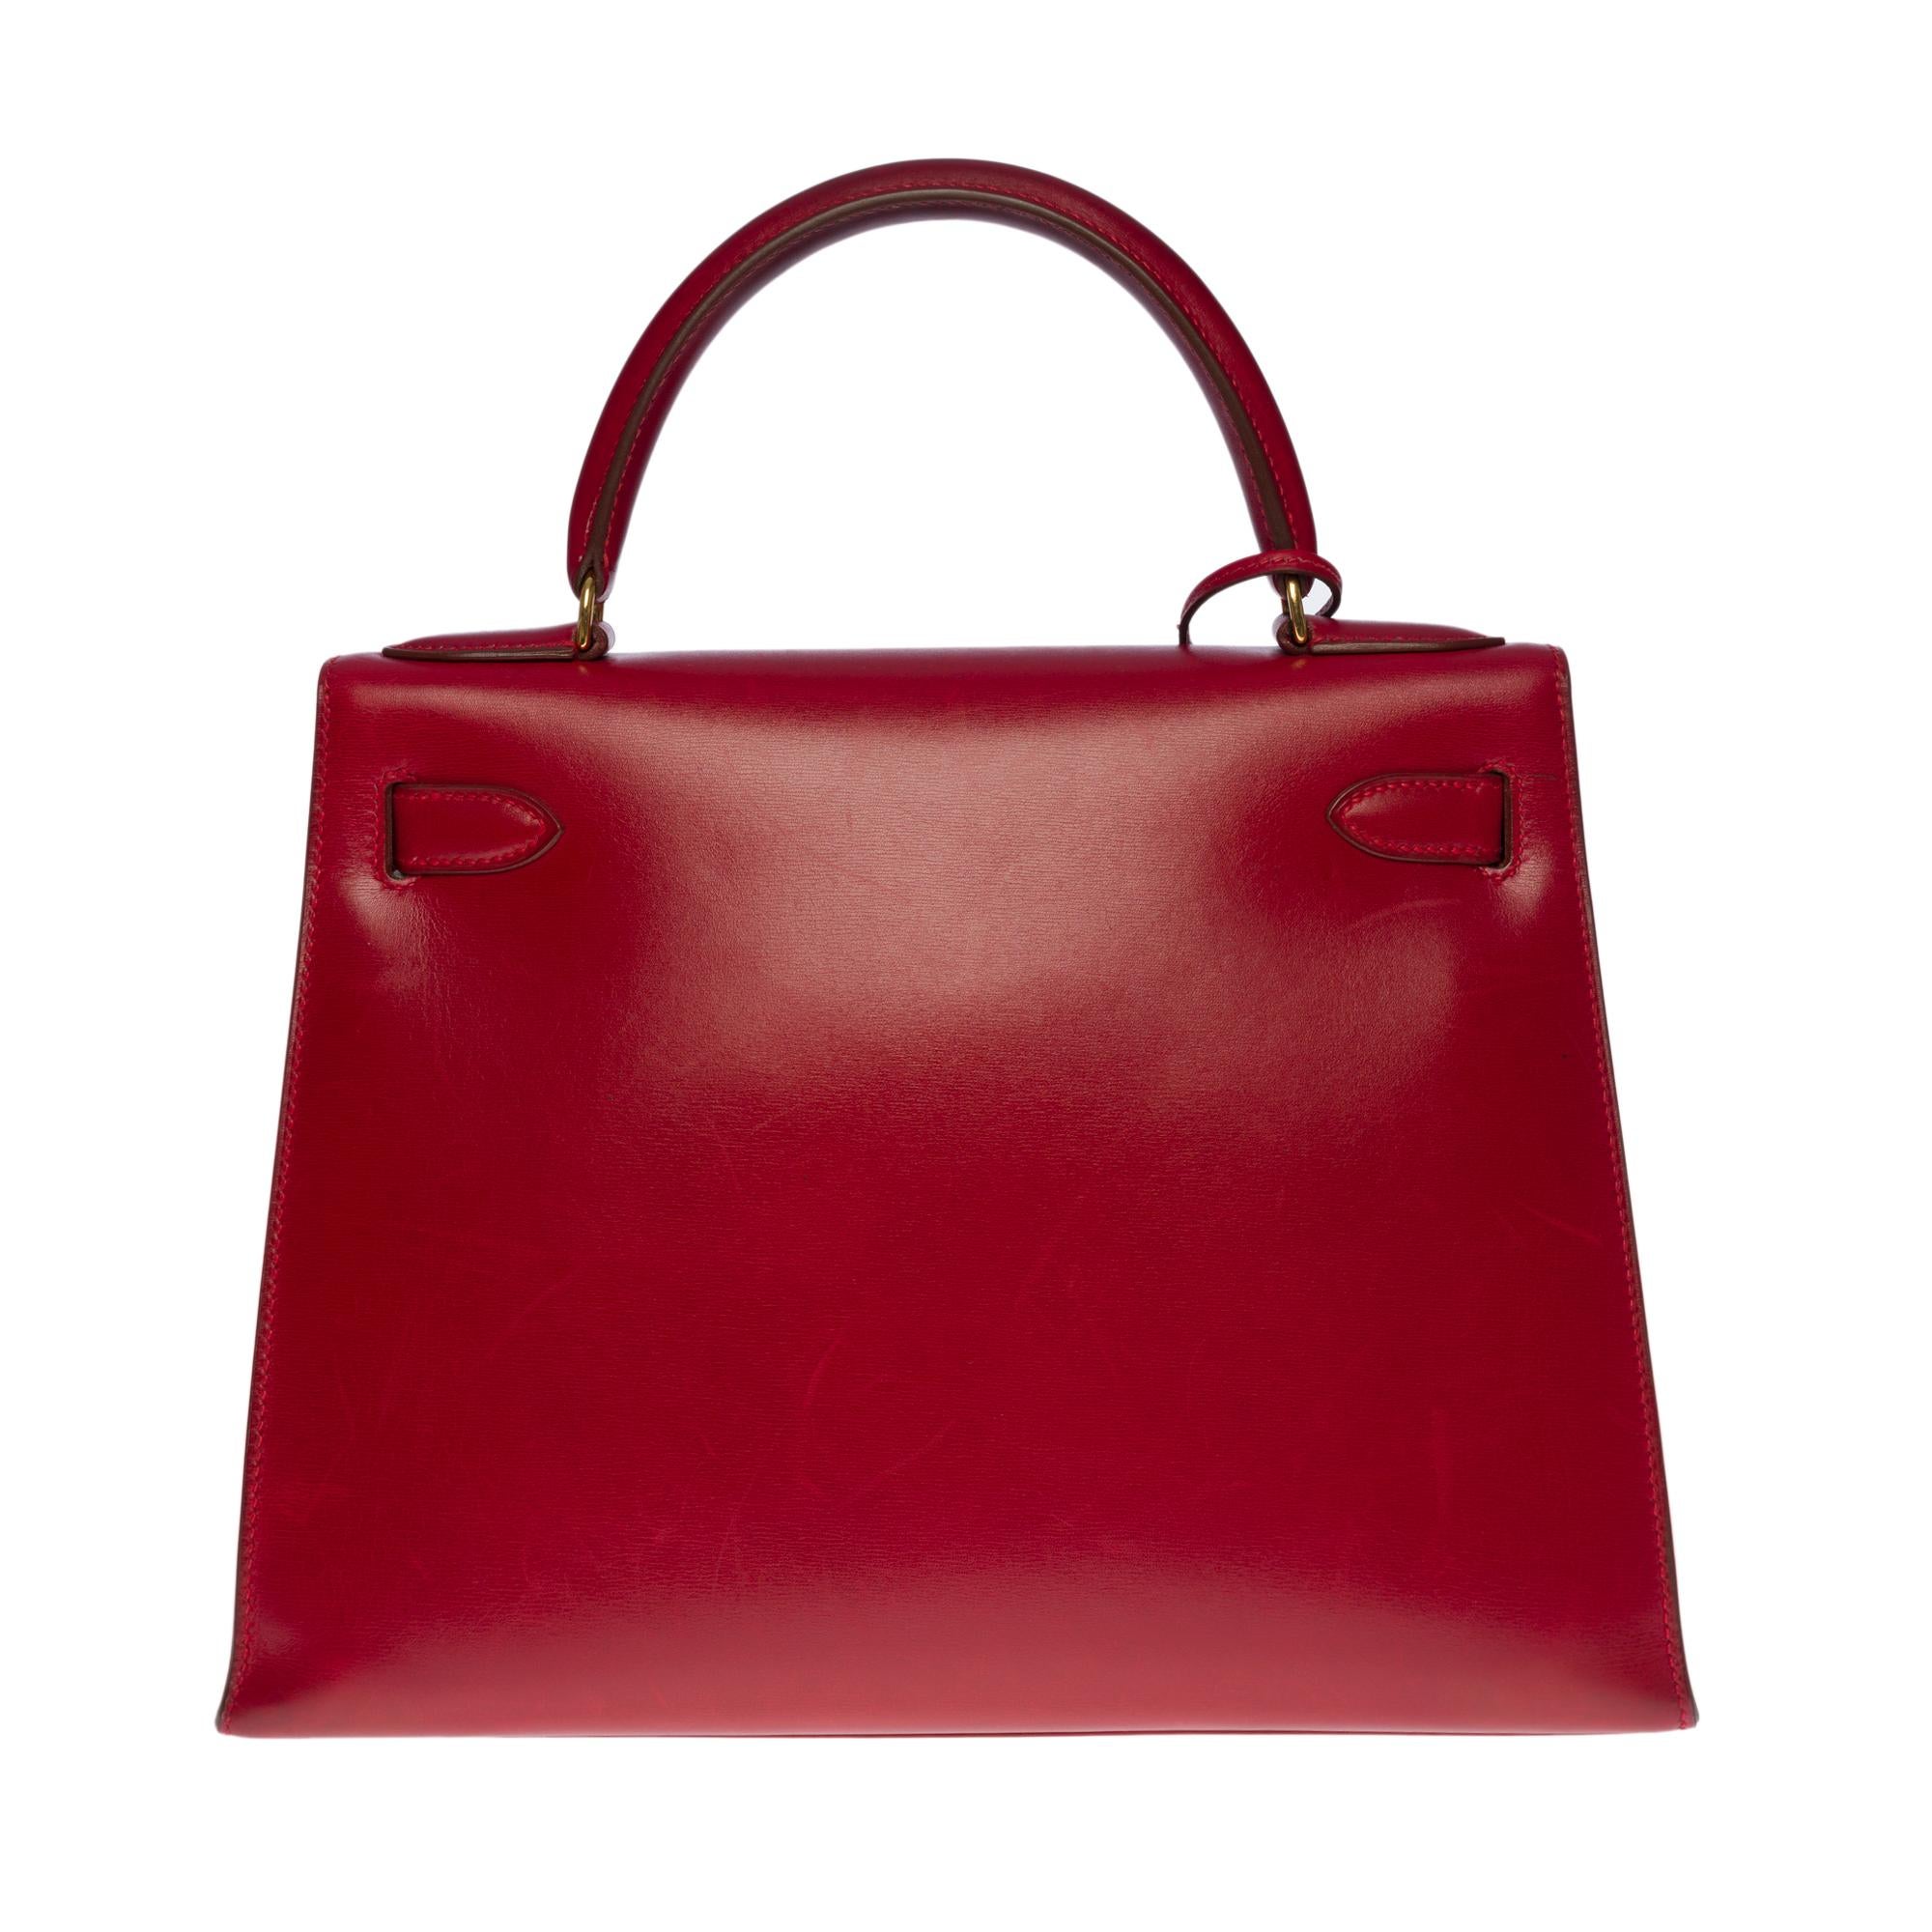 Exceptional Hermes Kelly 28cm sellier handbag in box calfskin leather,  gold plated metal hardware, leather handle box red allowing a hand carry

Flap closure
Red leather lining, one zippered pocket, two patch pockets
Signature: 